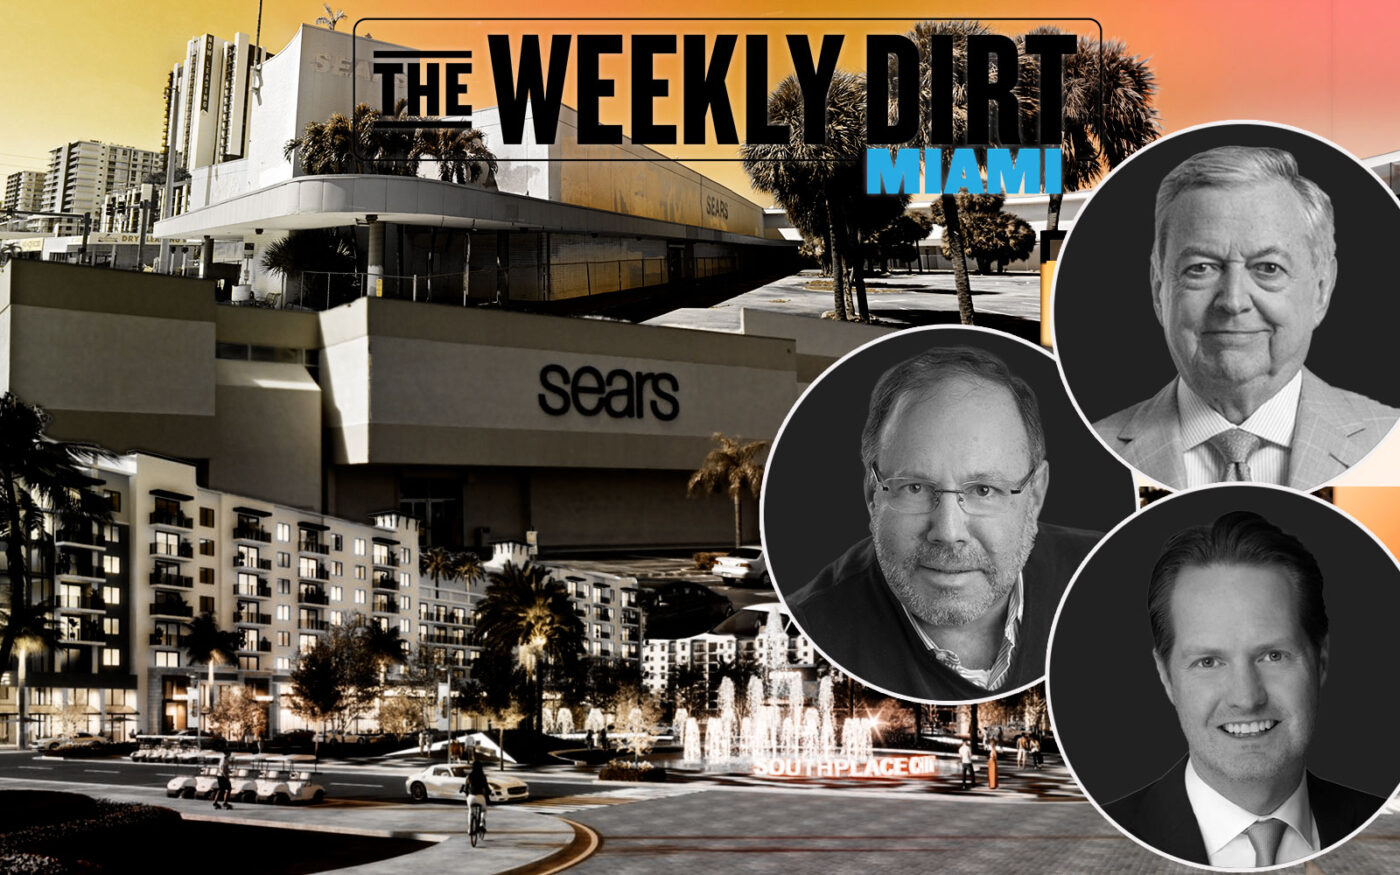 Weekly Dirt: South Florida Developers Find Land at the Mall